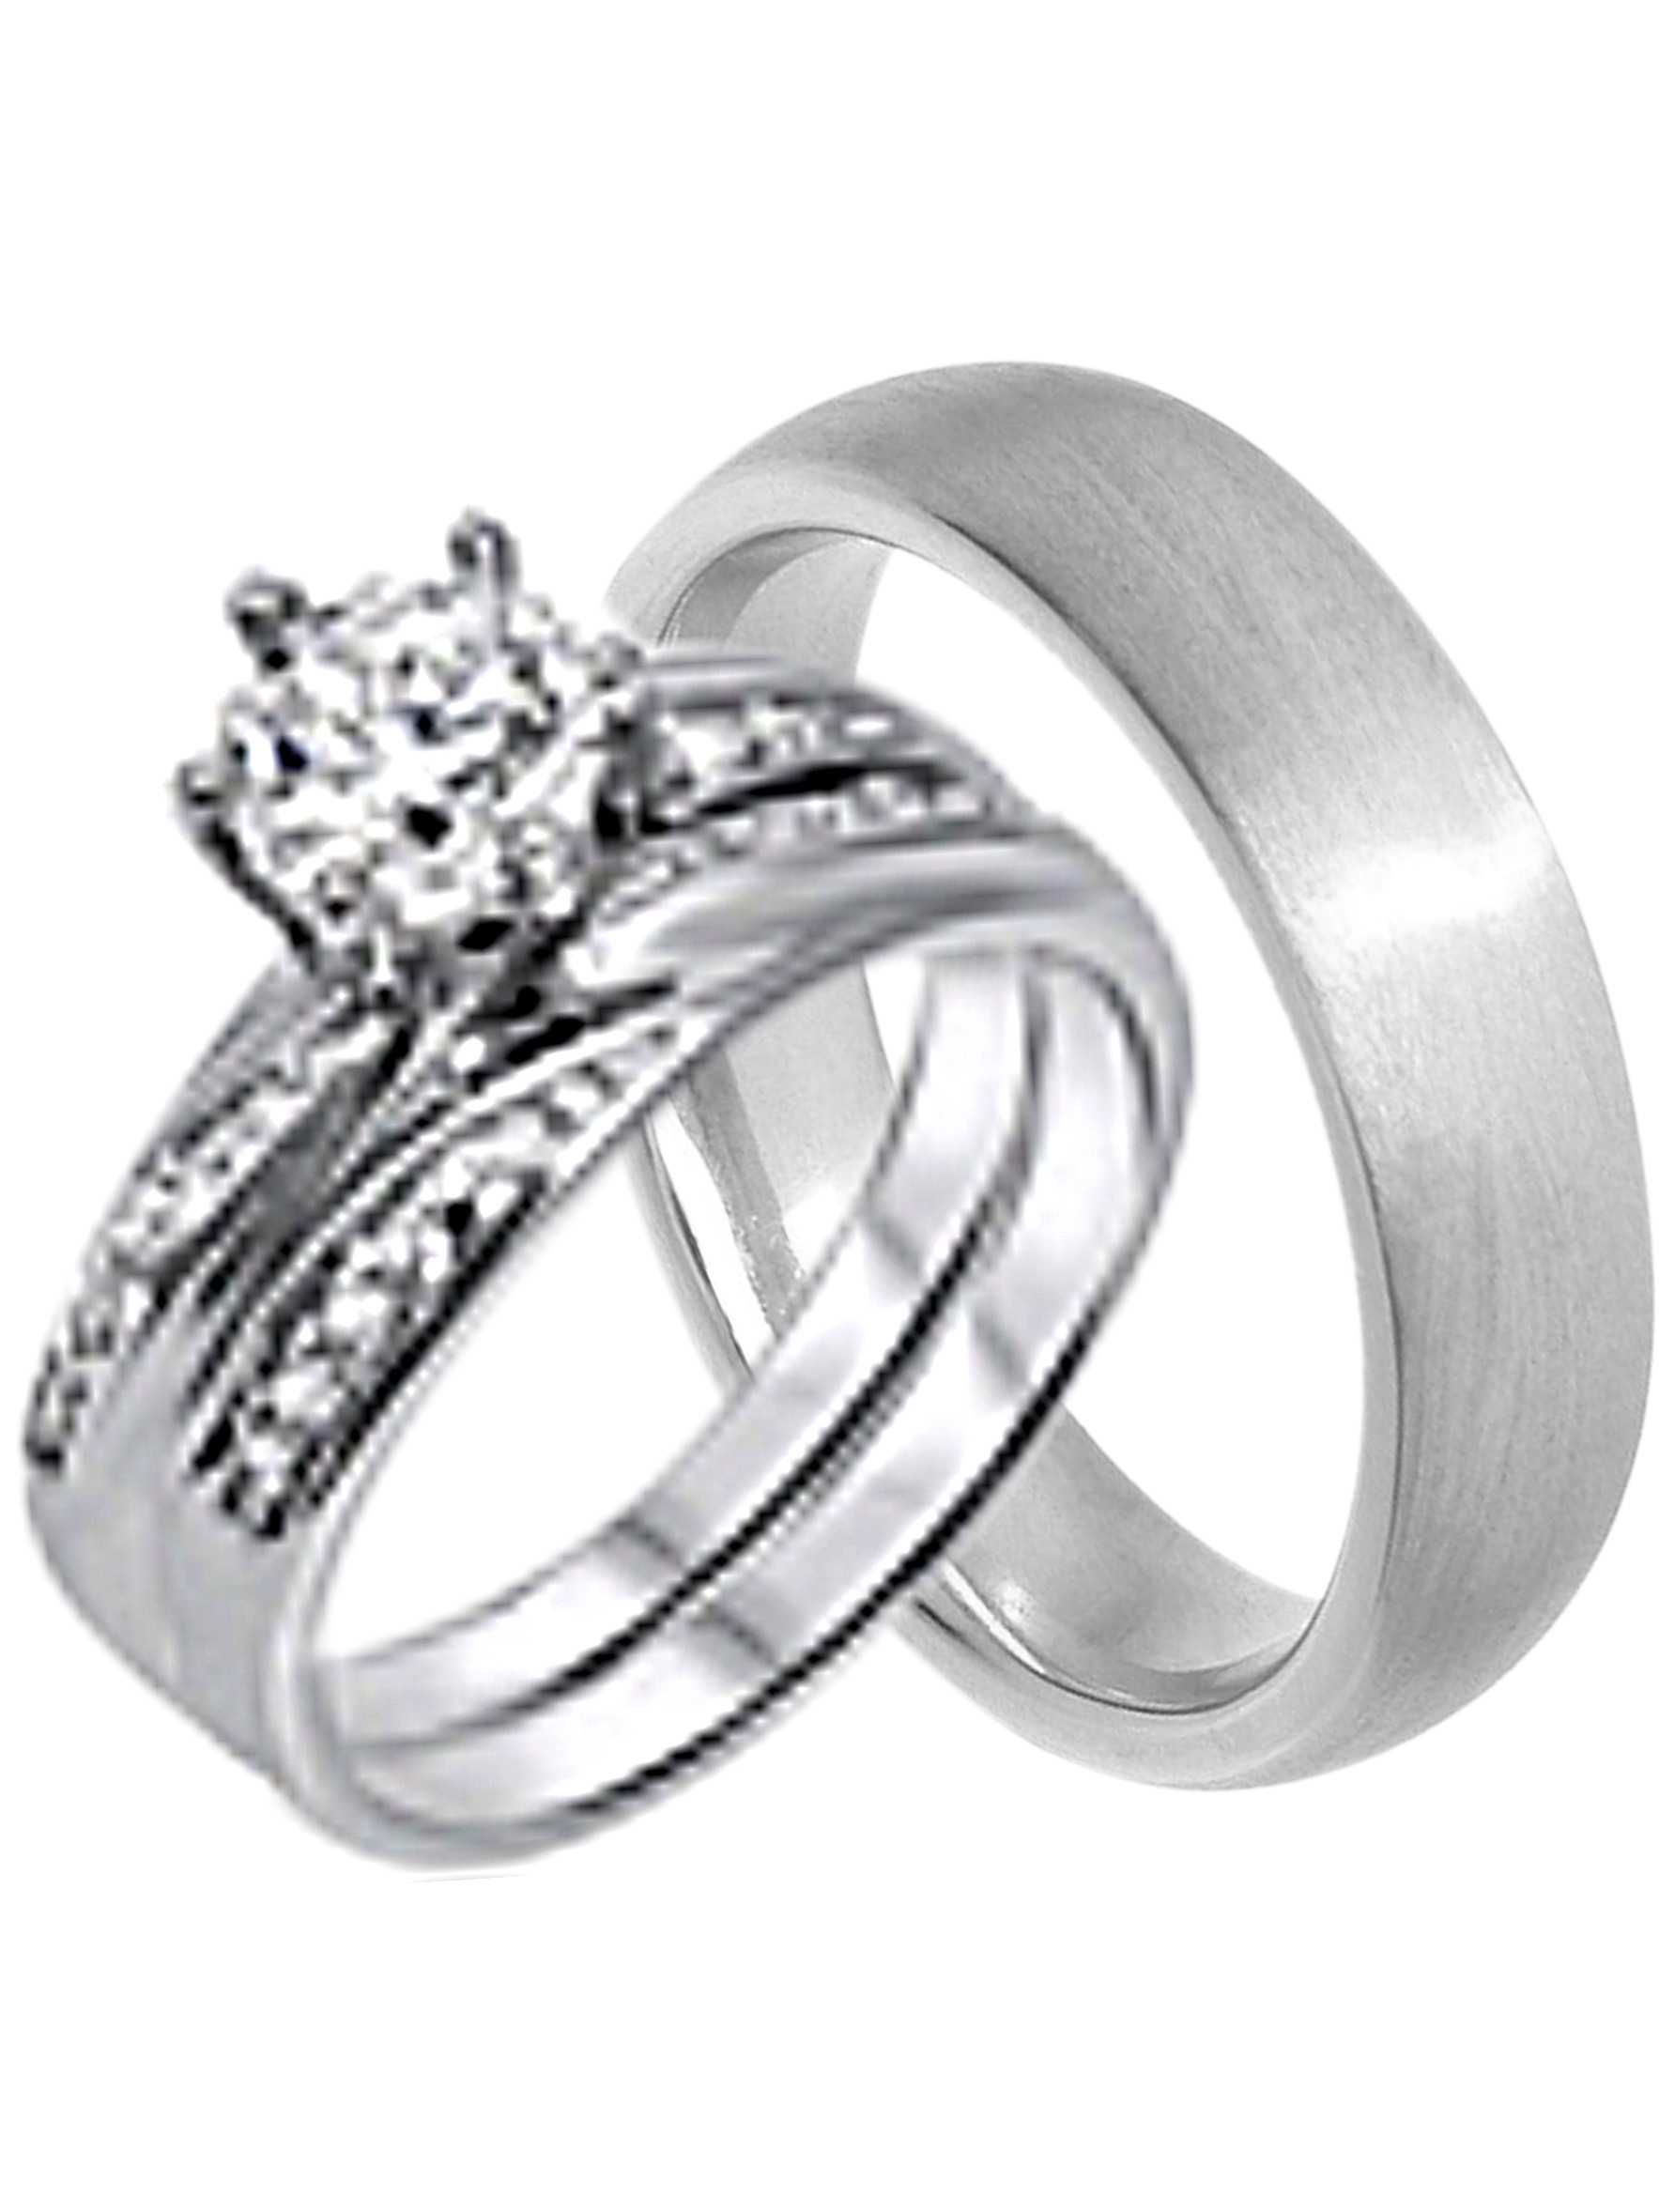 Wedding Ring Sets For Him And Her Walmart
 His and Hers Wedding Ring Set Cheap Wedding Bands for Him